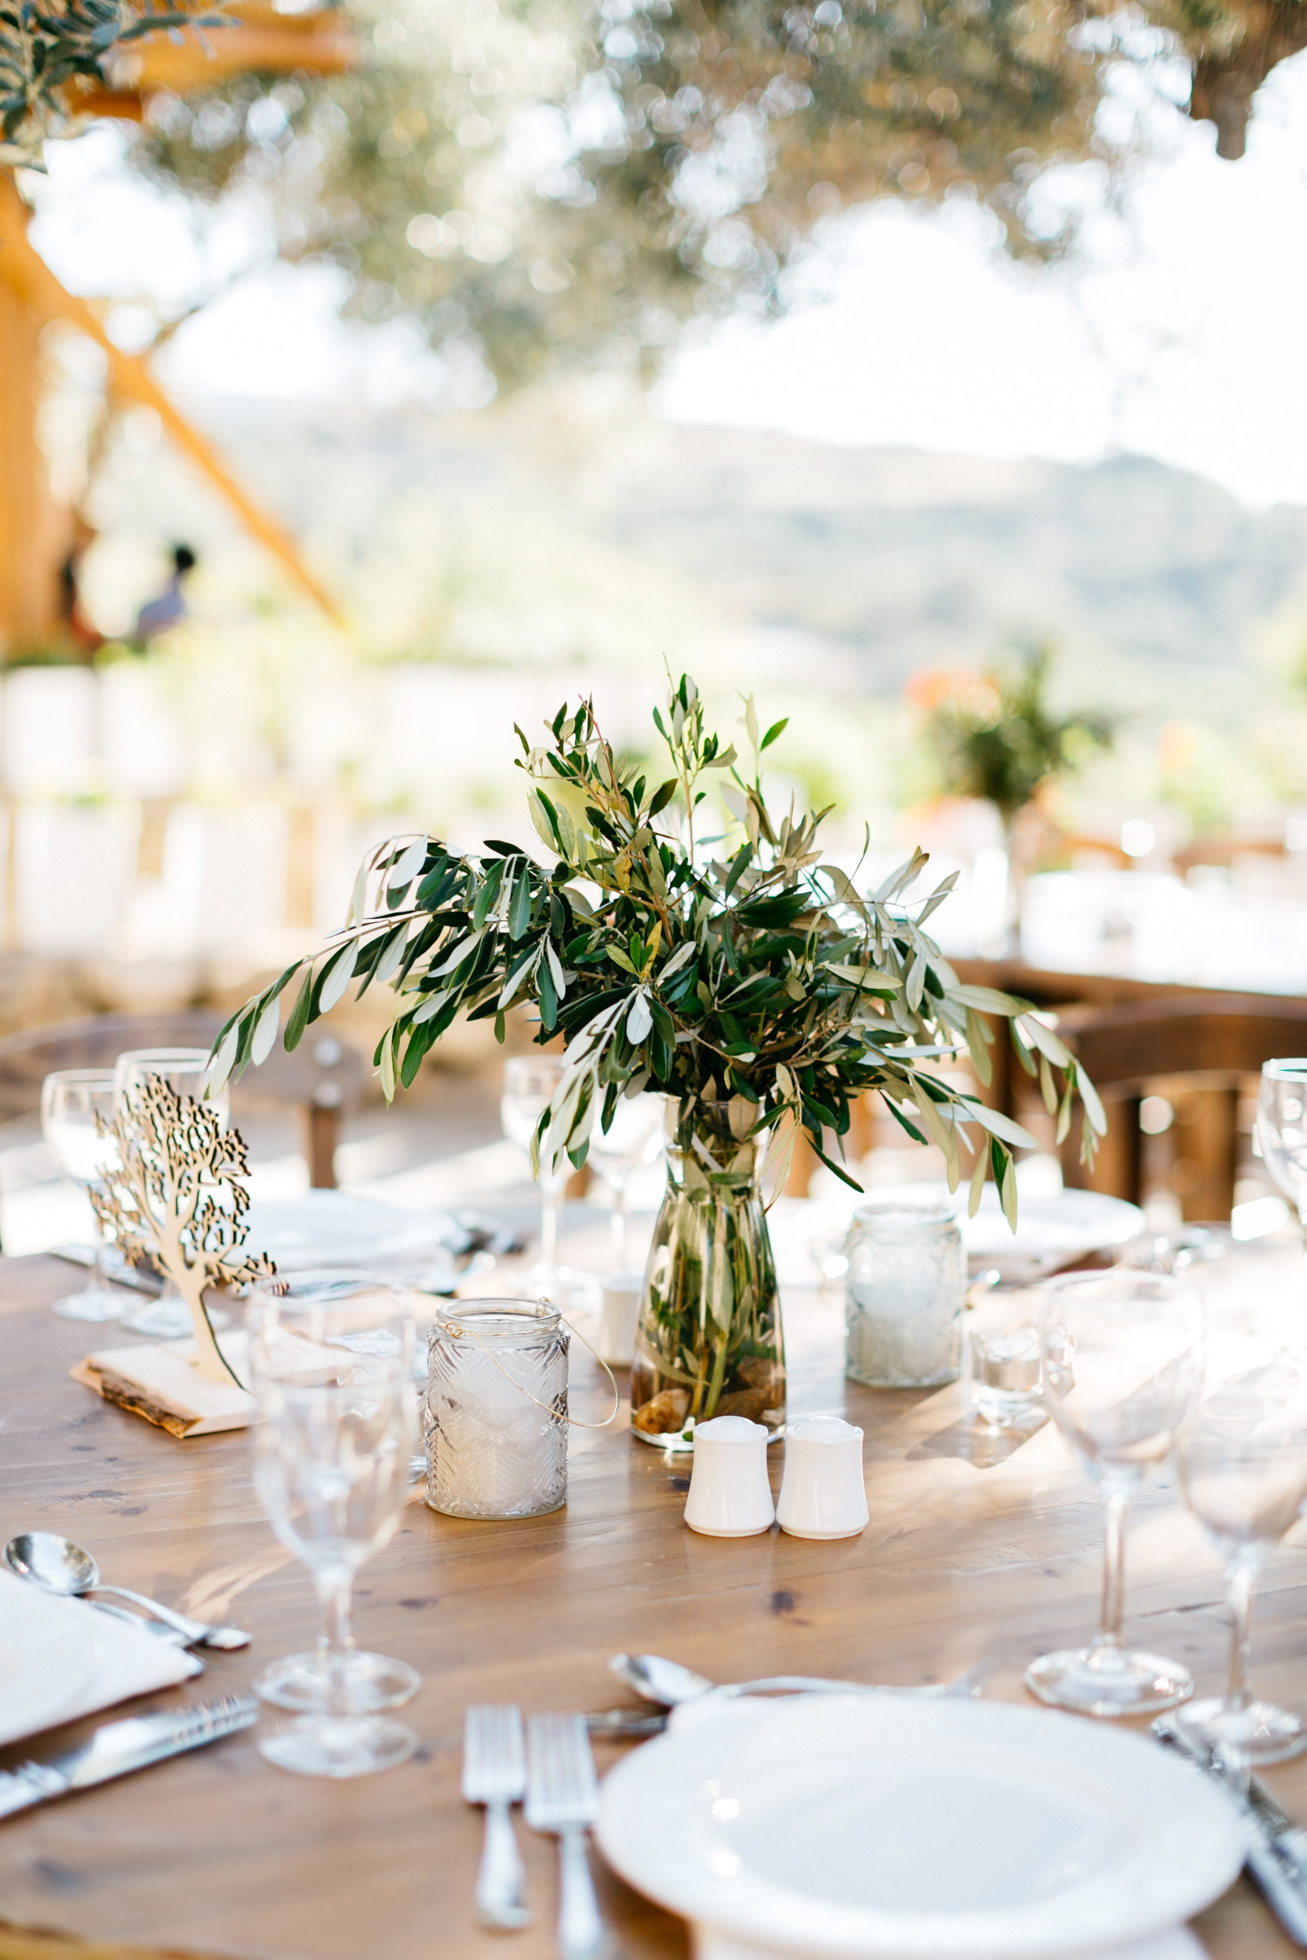 Wedding dinner setup and details in Agreco Farms, Grecotel, Crete, Greece.